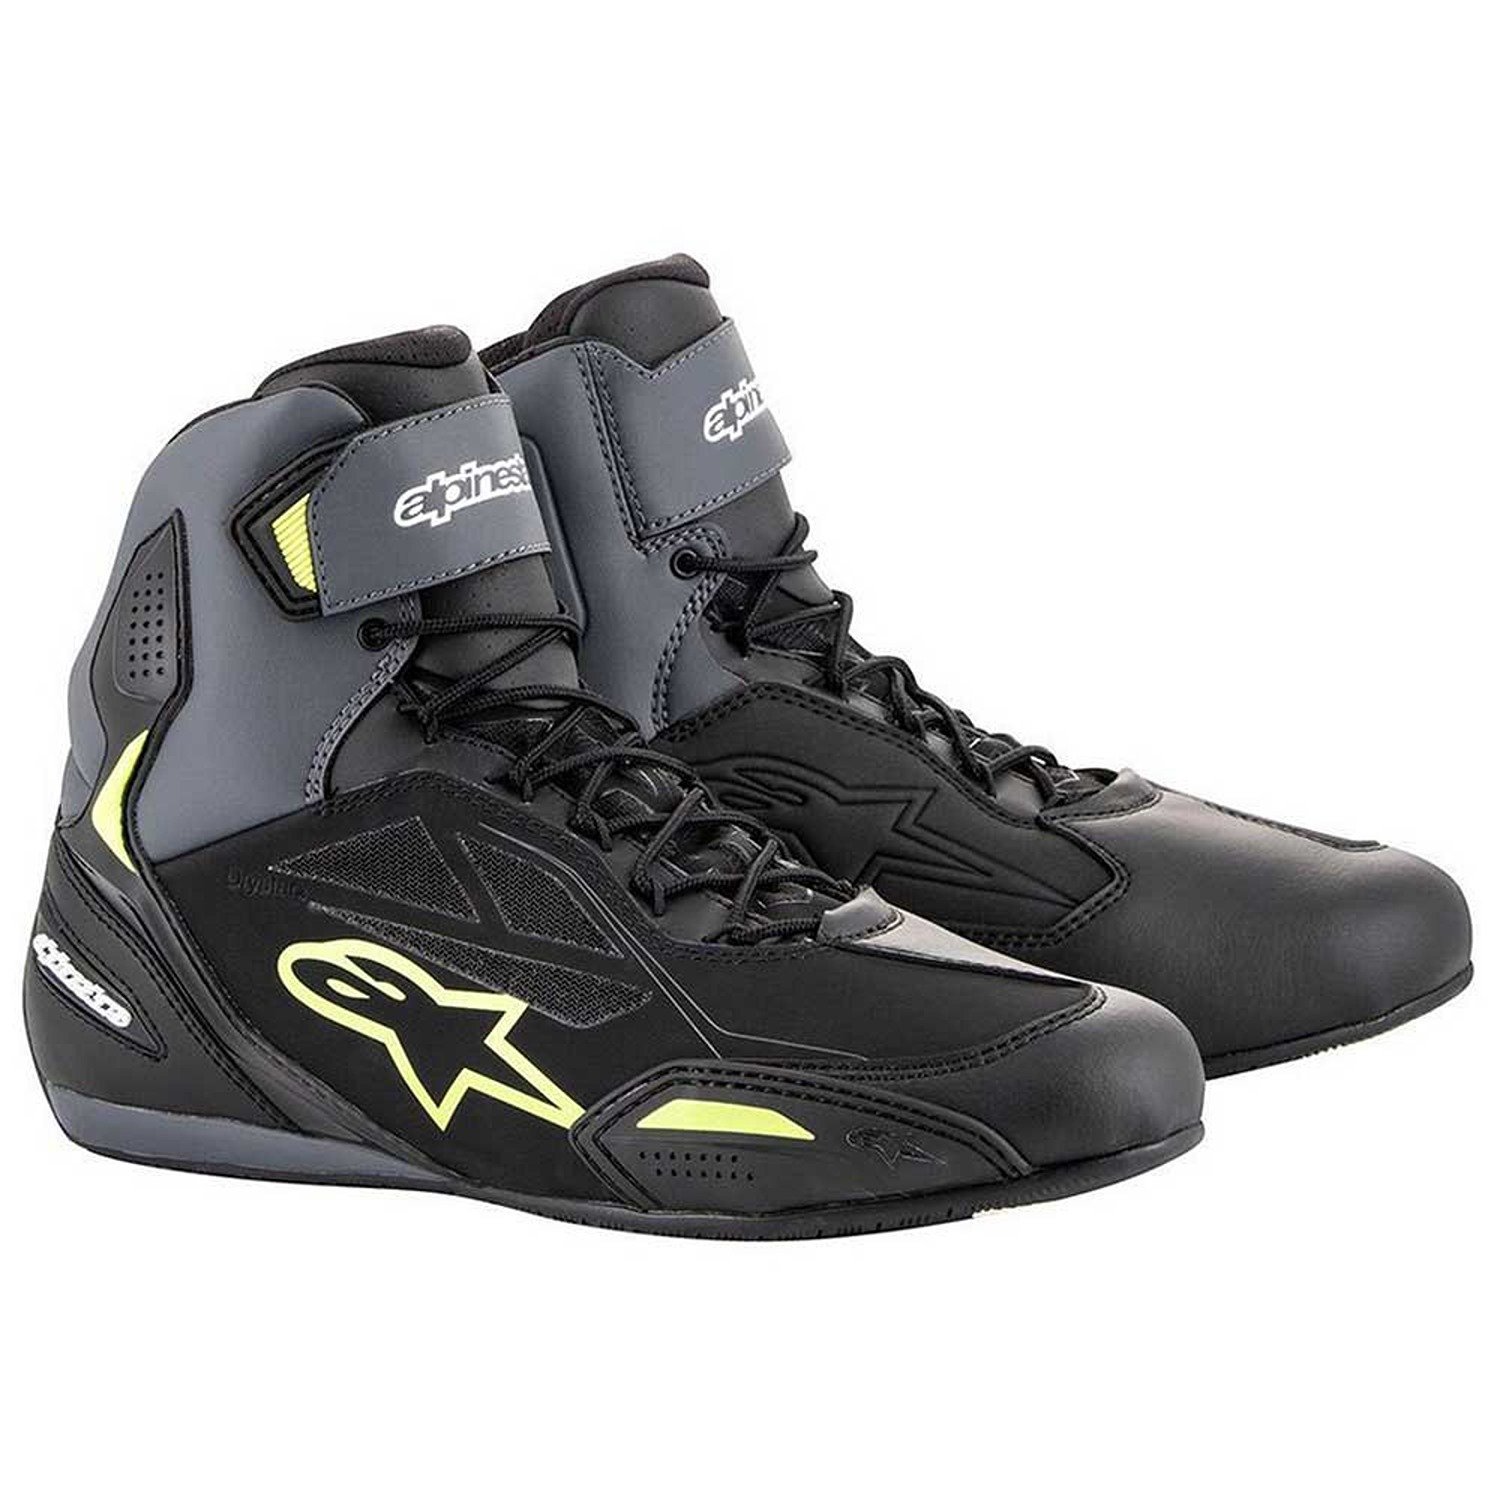 Image of Alpinestars Faster-3 Shoes Black Yellow Fluo Size US 115 ID 8059347331133